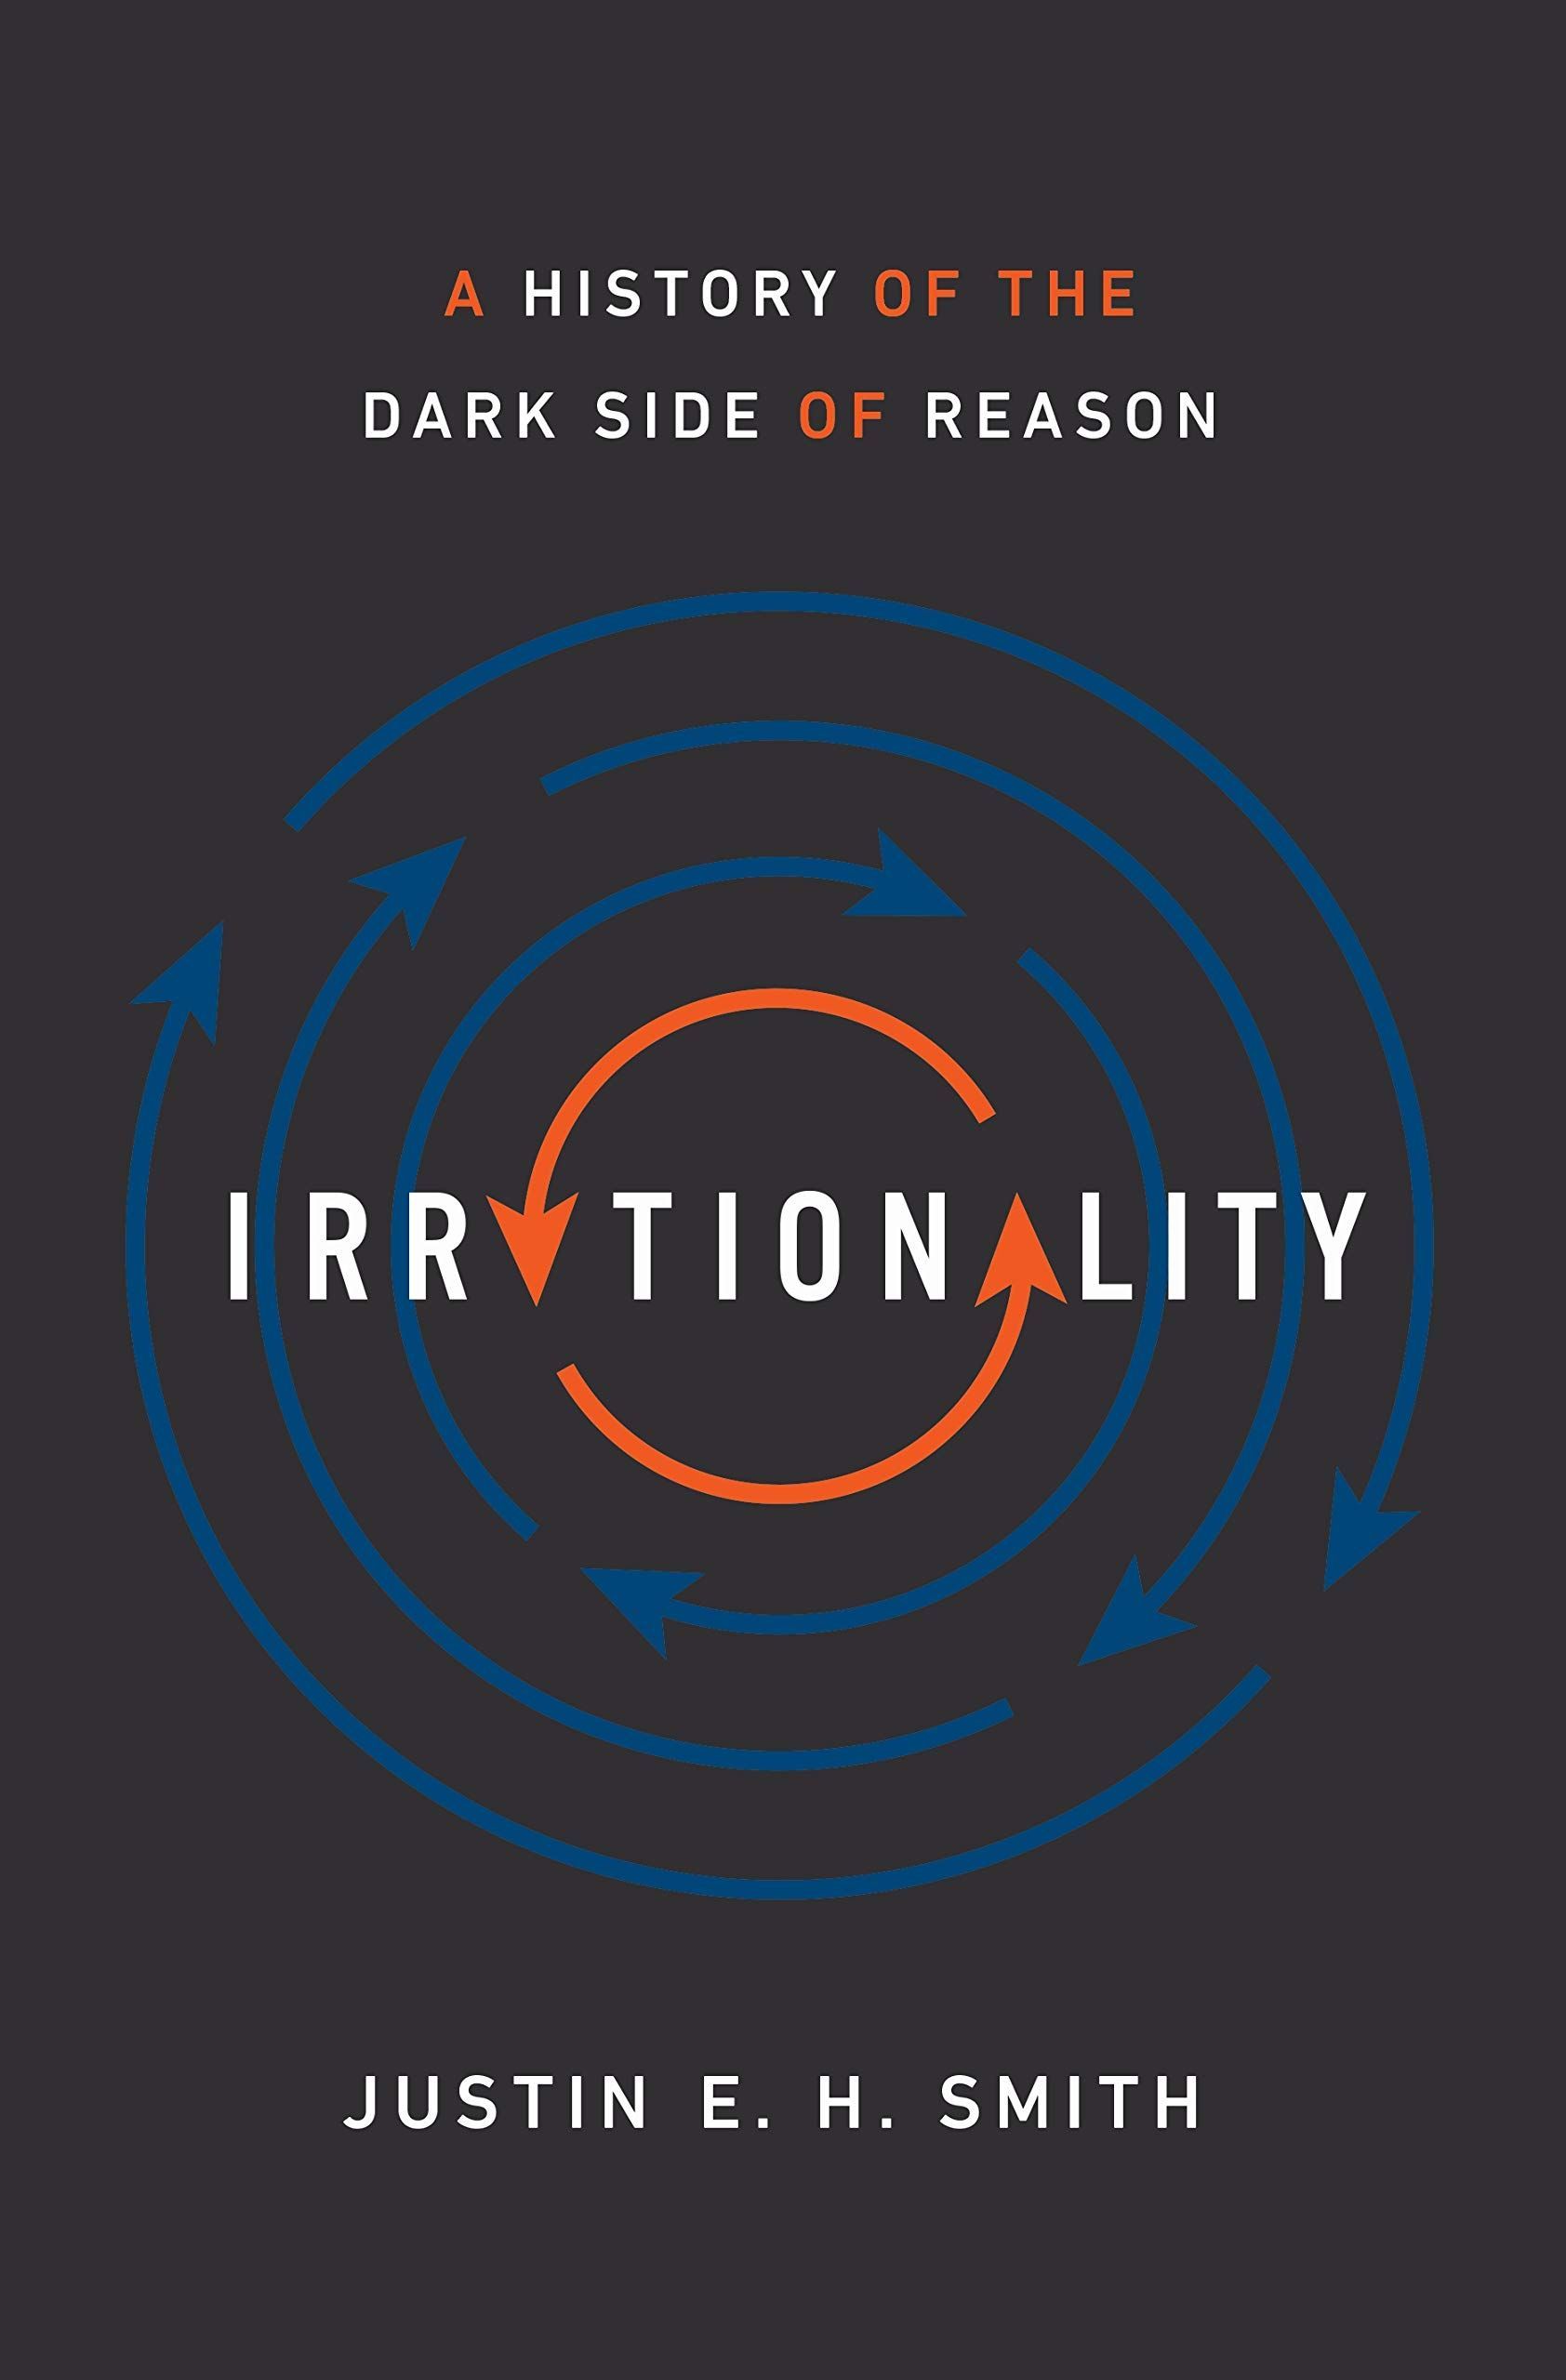 Ornamental Thinking: On “Irrationality: A History of the Dark Side of Reason”